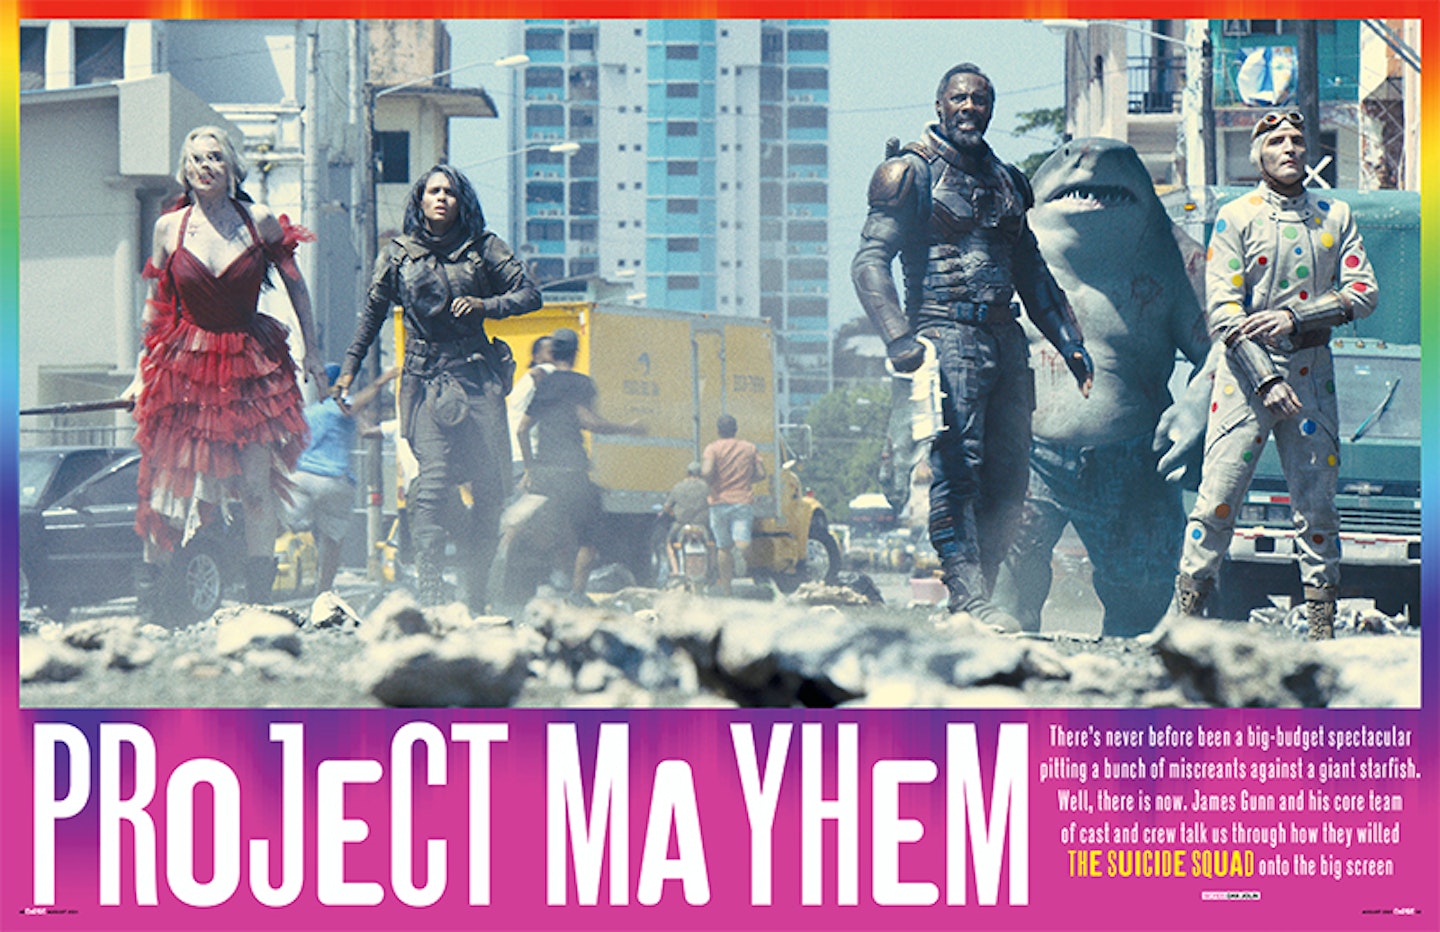 Empire Issue Preview: The Suicide Squad, James Gunn Special, M Night  Shyamalan, Reminiscence, Peter Jackson And Edgar Wright